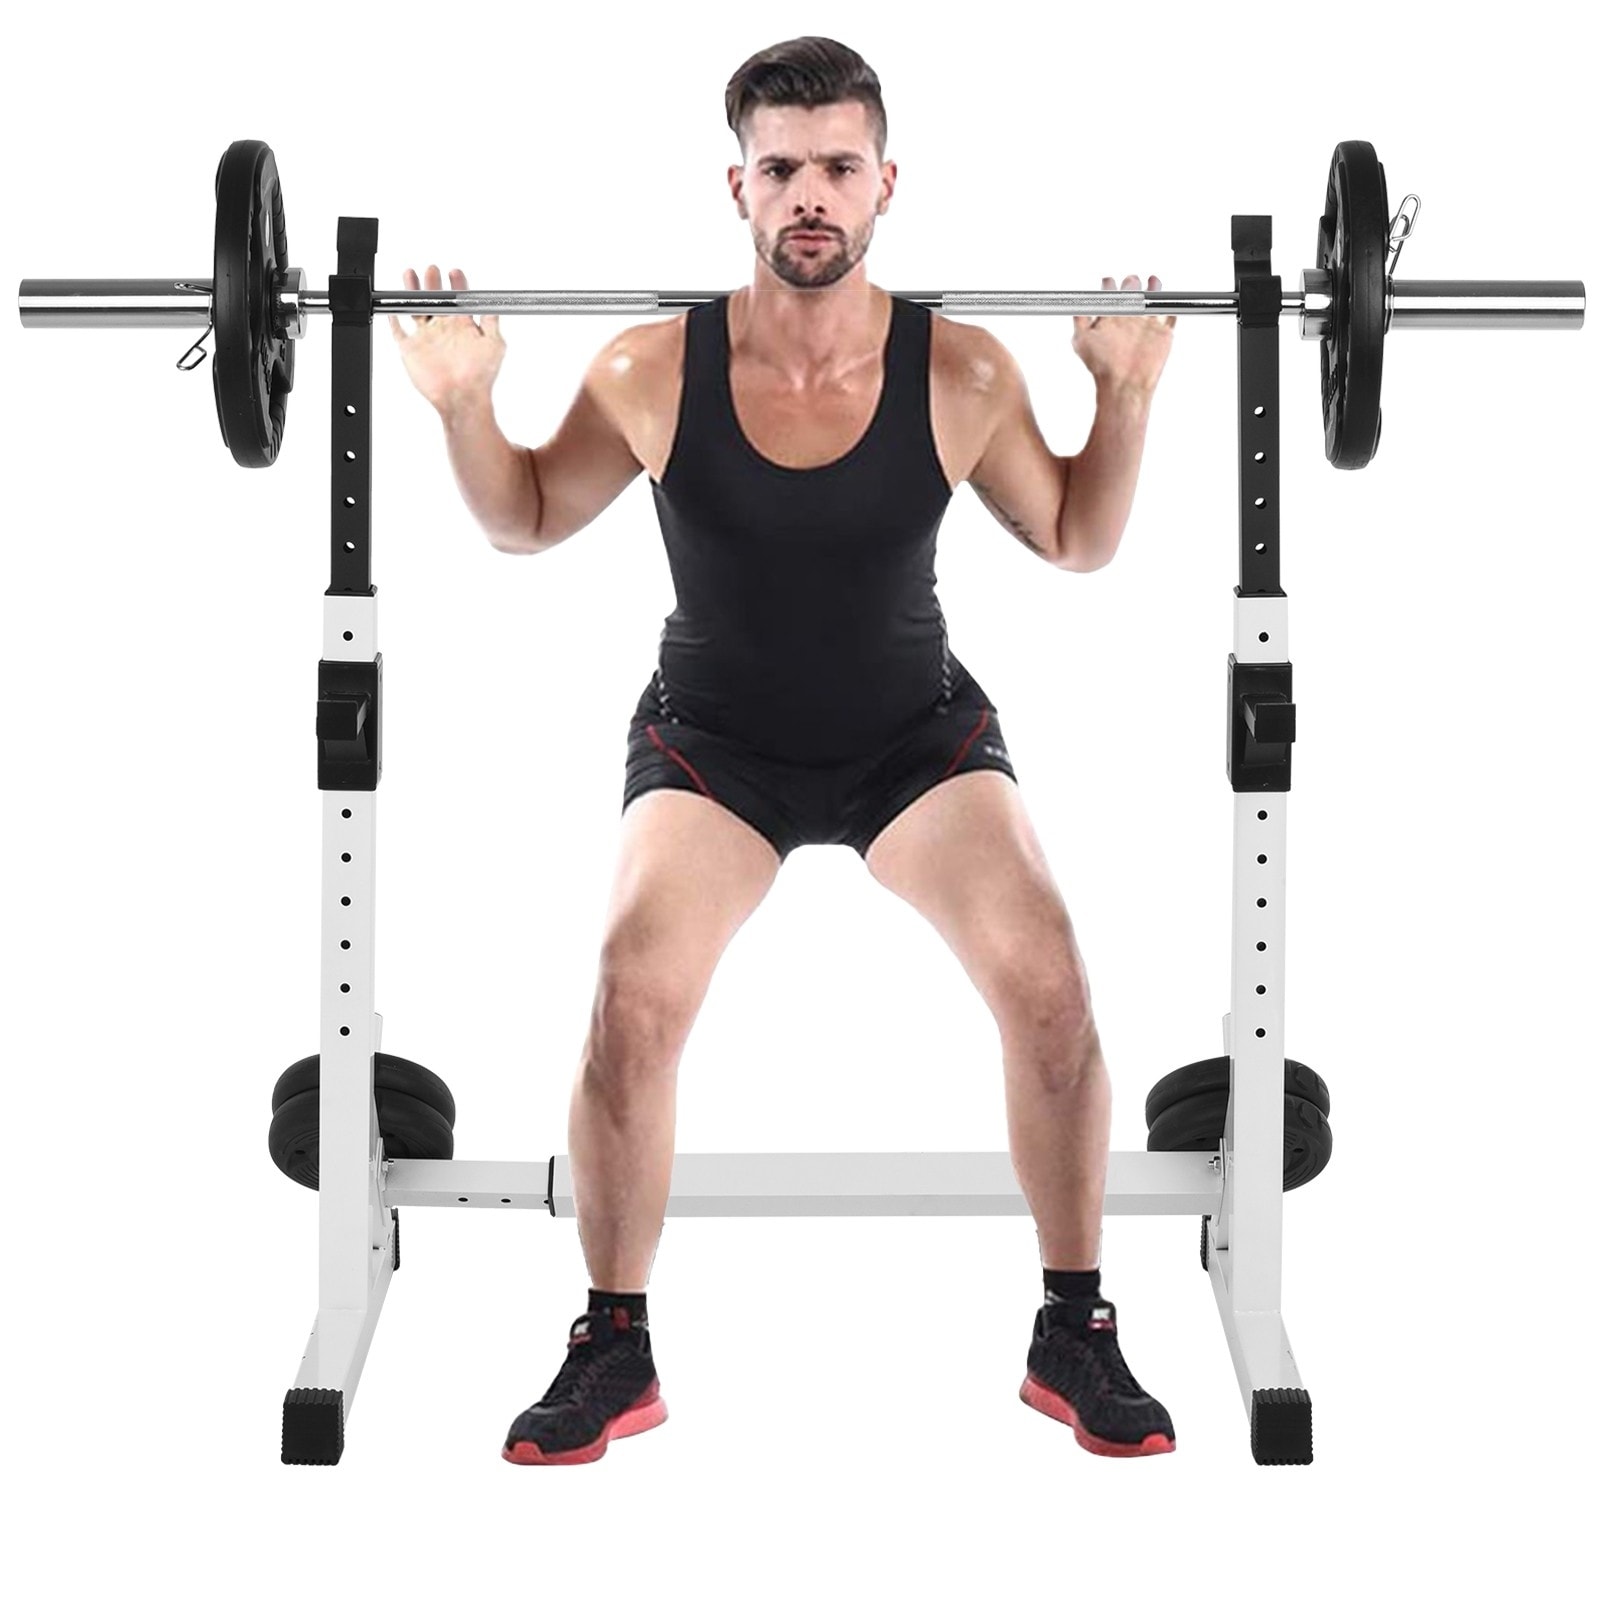 Squat Rack,Adjustable Barbell Rack,Dipping Station Dip Stand Home Fitness Equipment Weight Training Equipment,Max Load 250 Kg Air Freight 